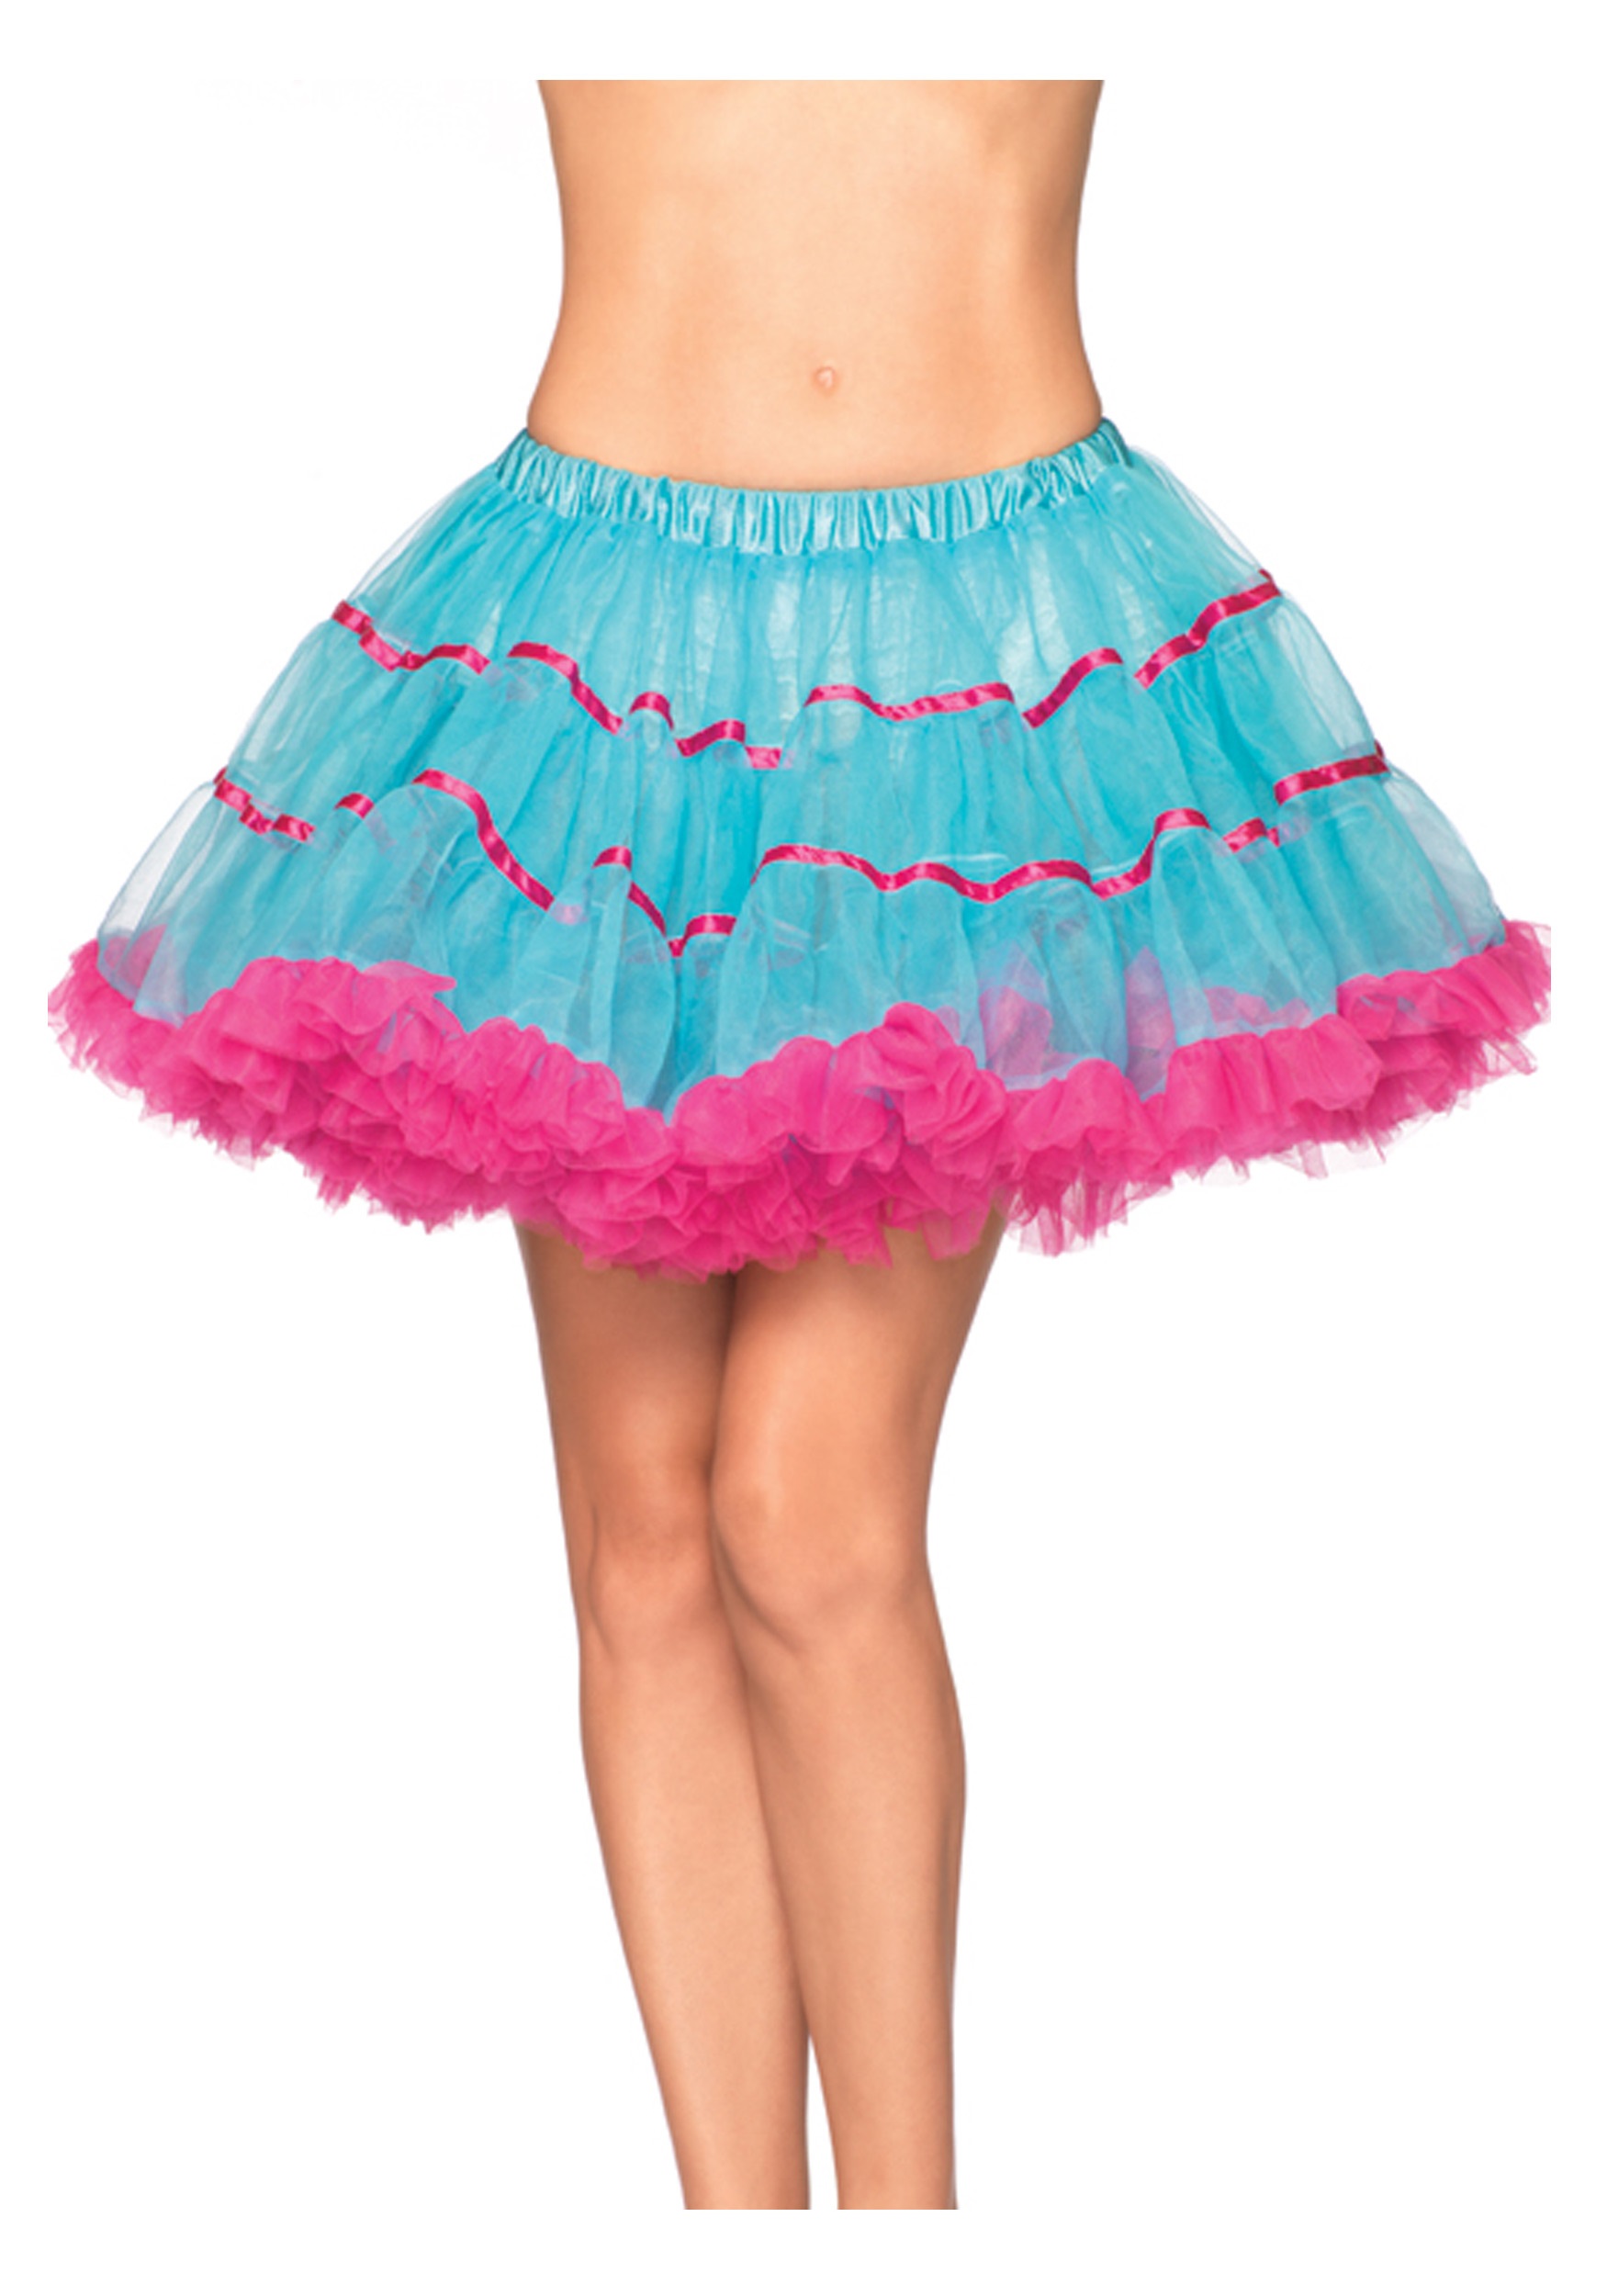 touw mode ontploffing Women's Turquoise and Neon Pink Petticoat